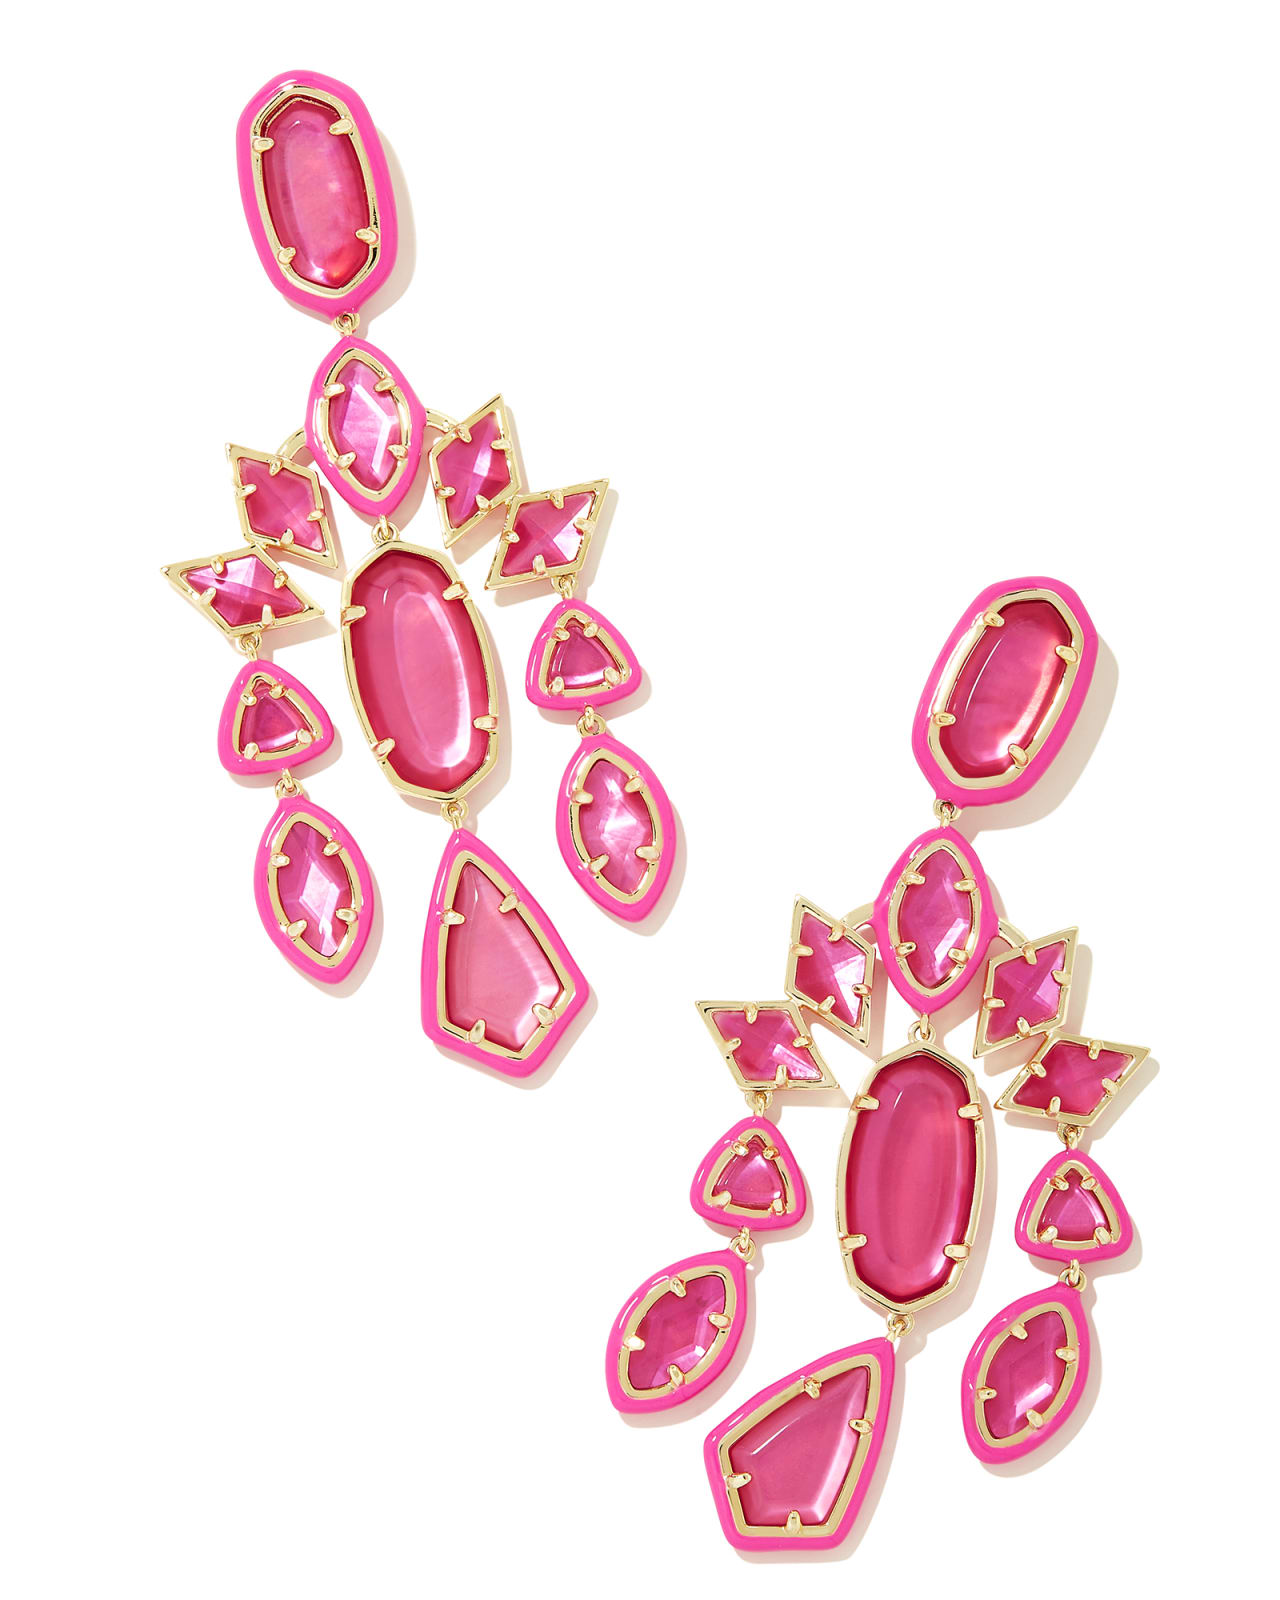 Greta Gold Statement Earrings in Pink Mix image number 0